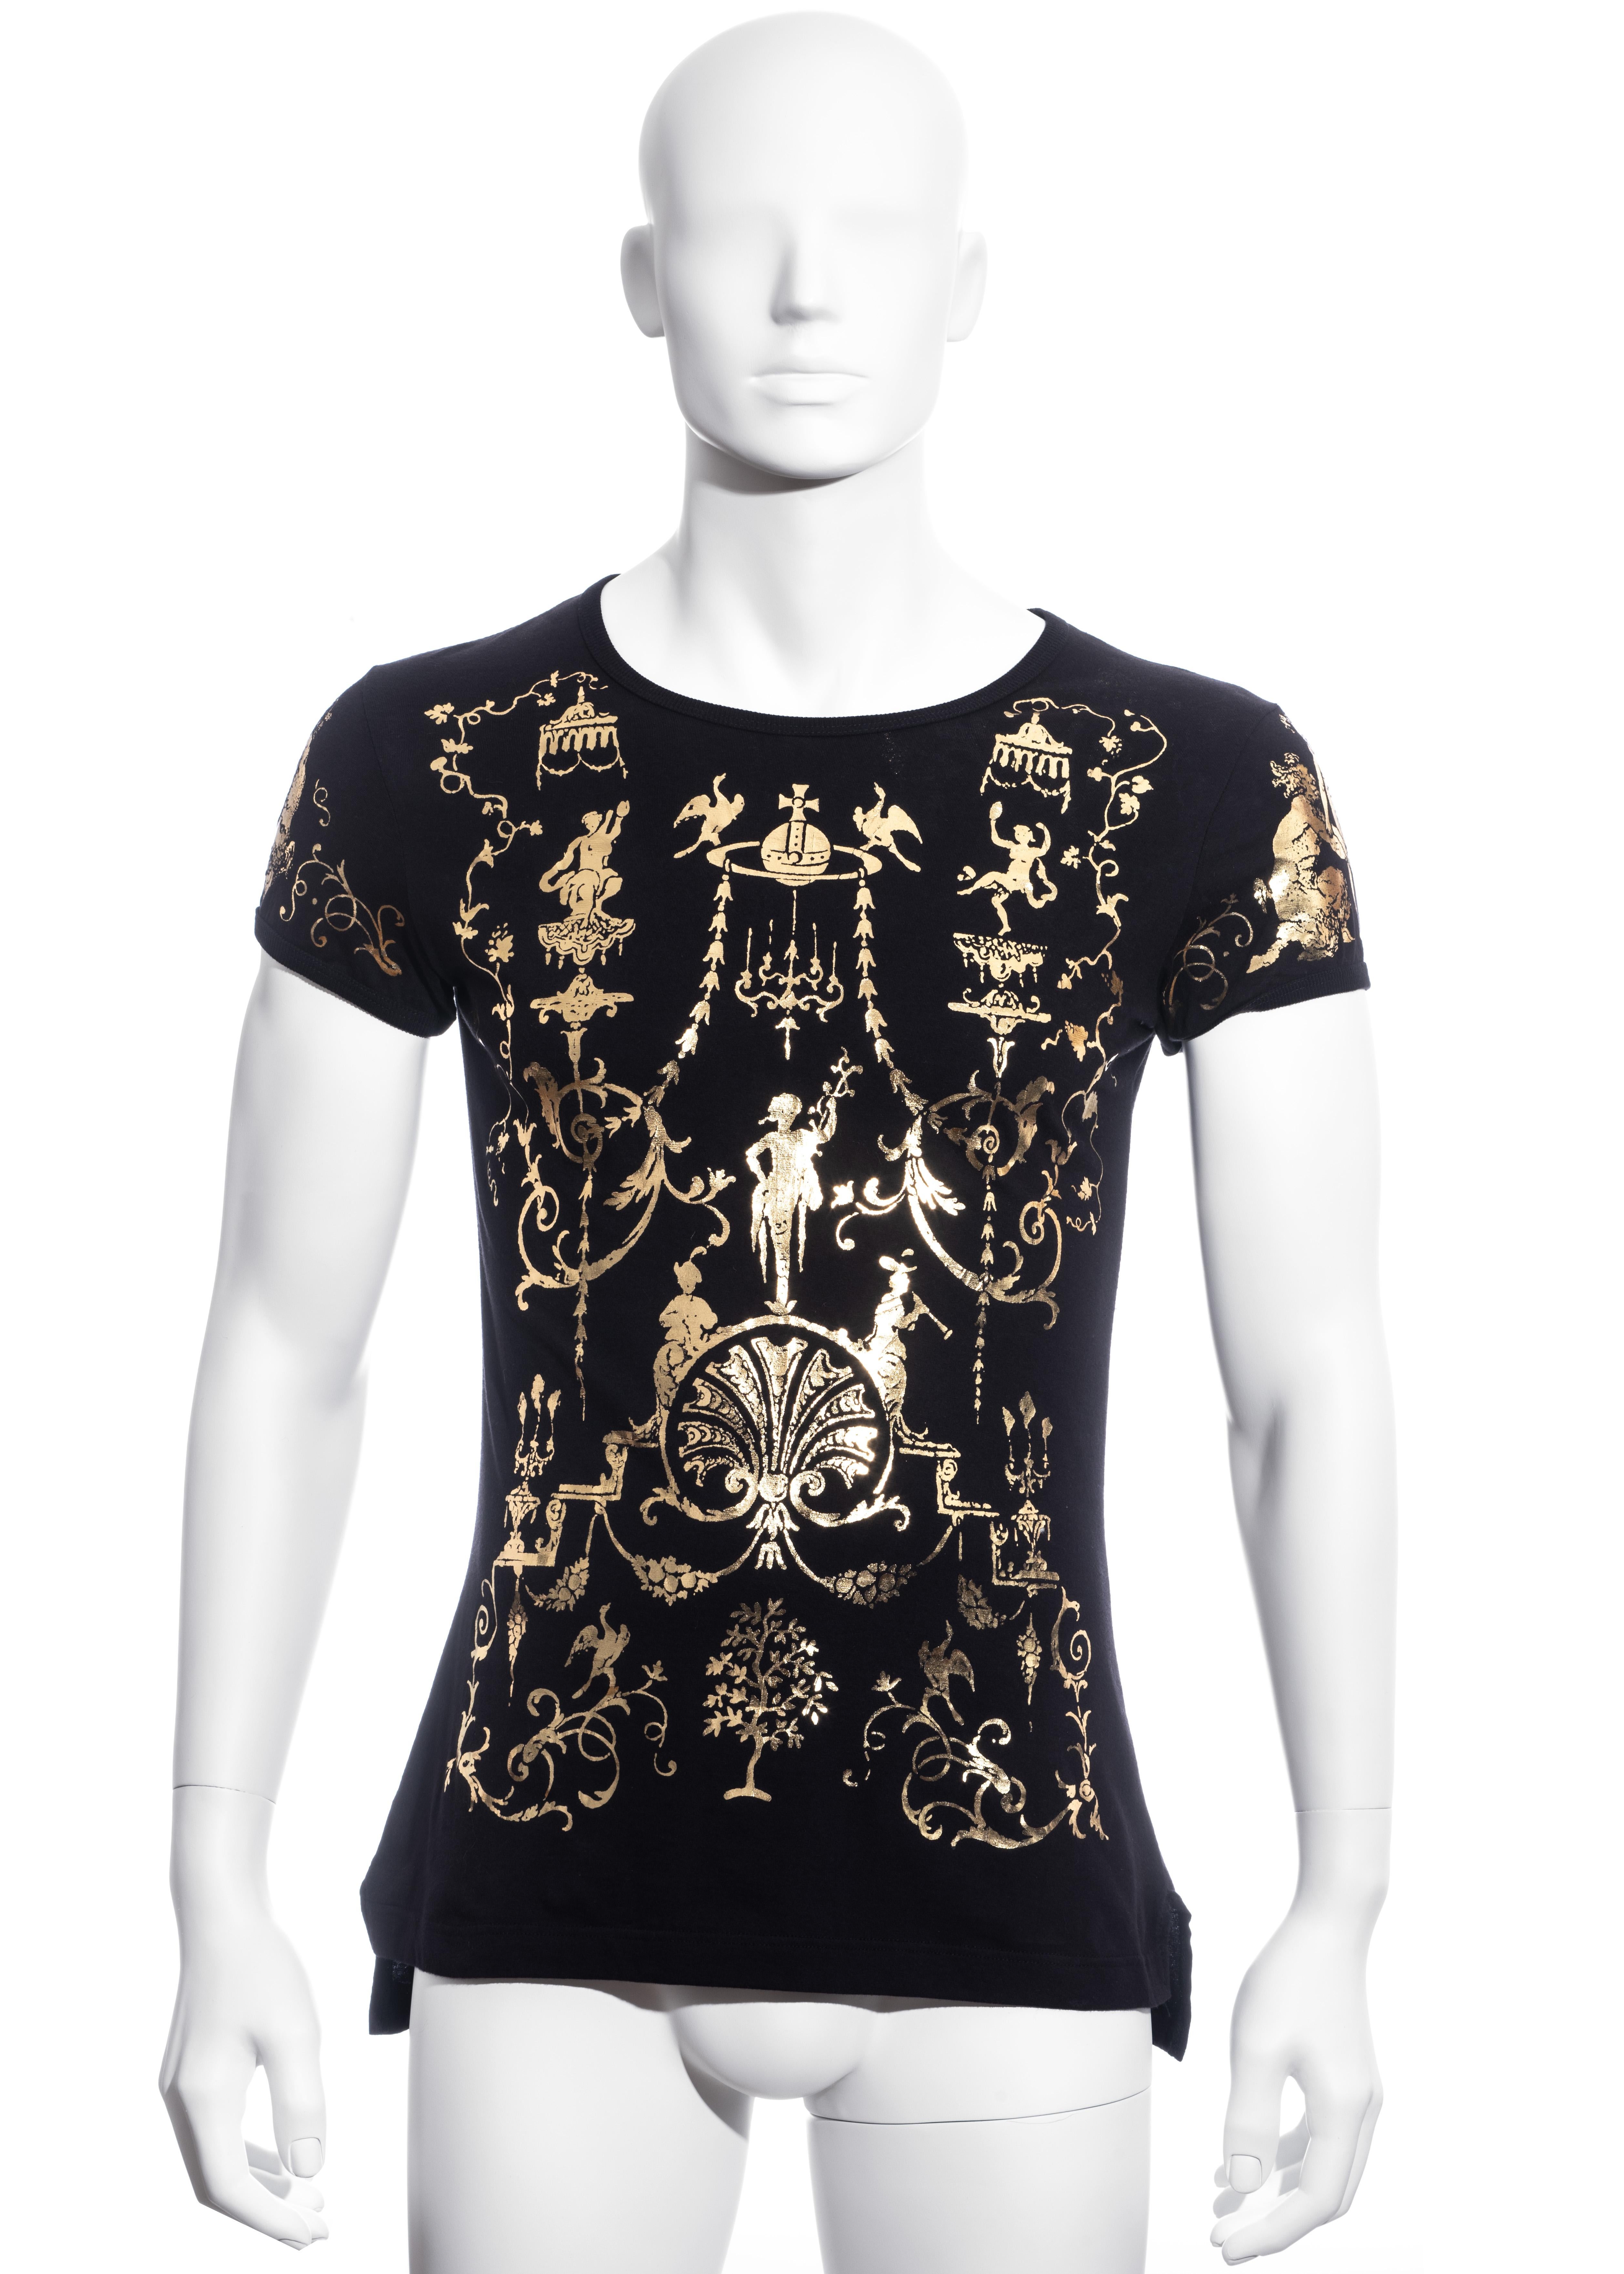 ▪ Men's Vivienne Westwood t-shirt 
▪ Metallic gold applied decoration of classical figures and motifs 
▪ Portrait collection 
▪ Size Small
▪ Fall-Winter 1990
